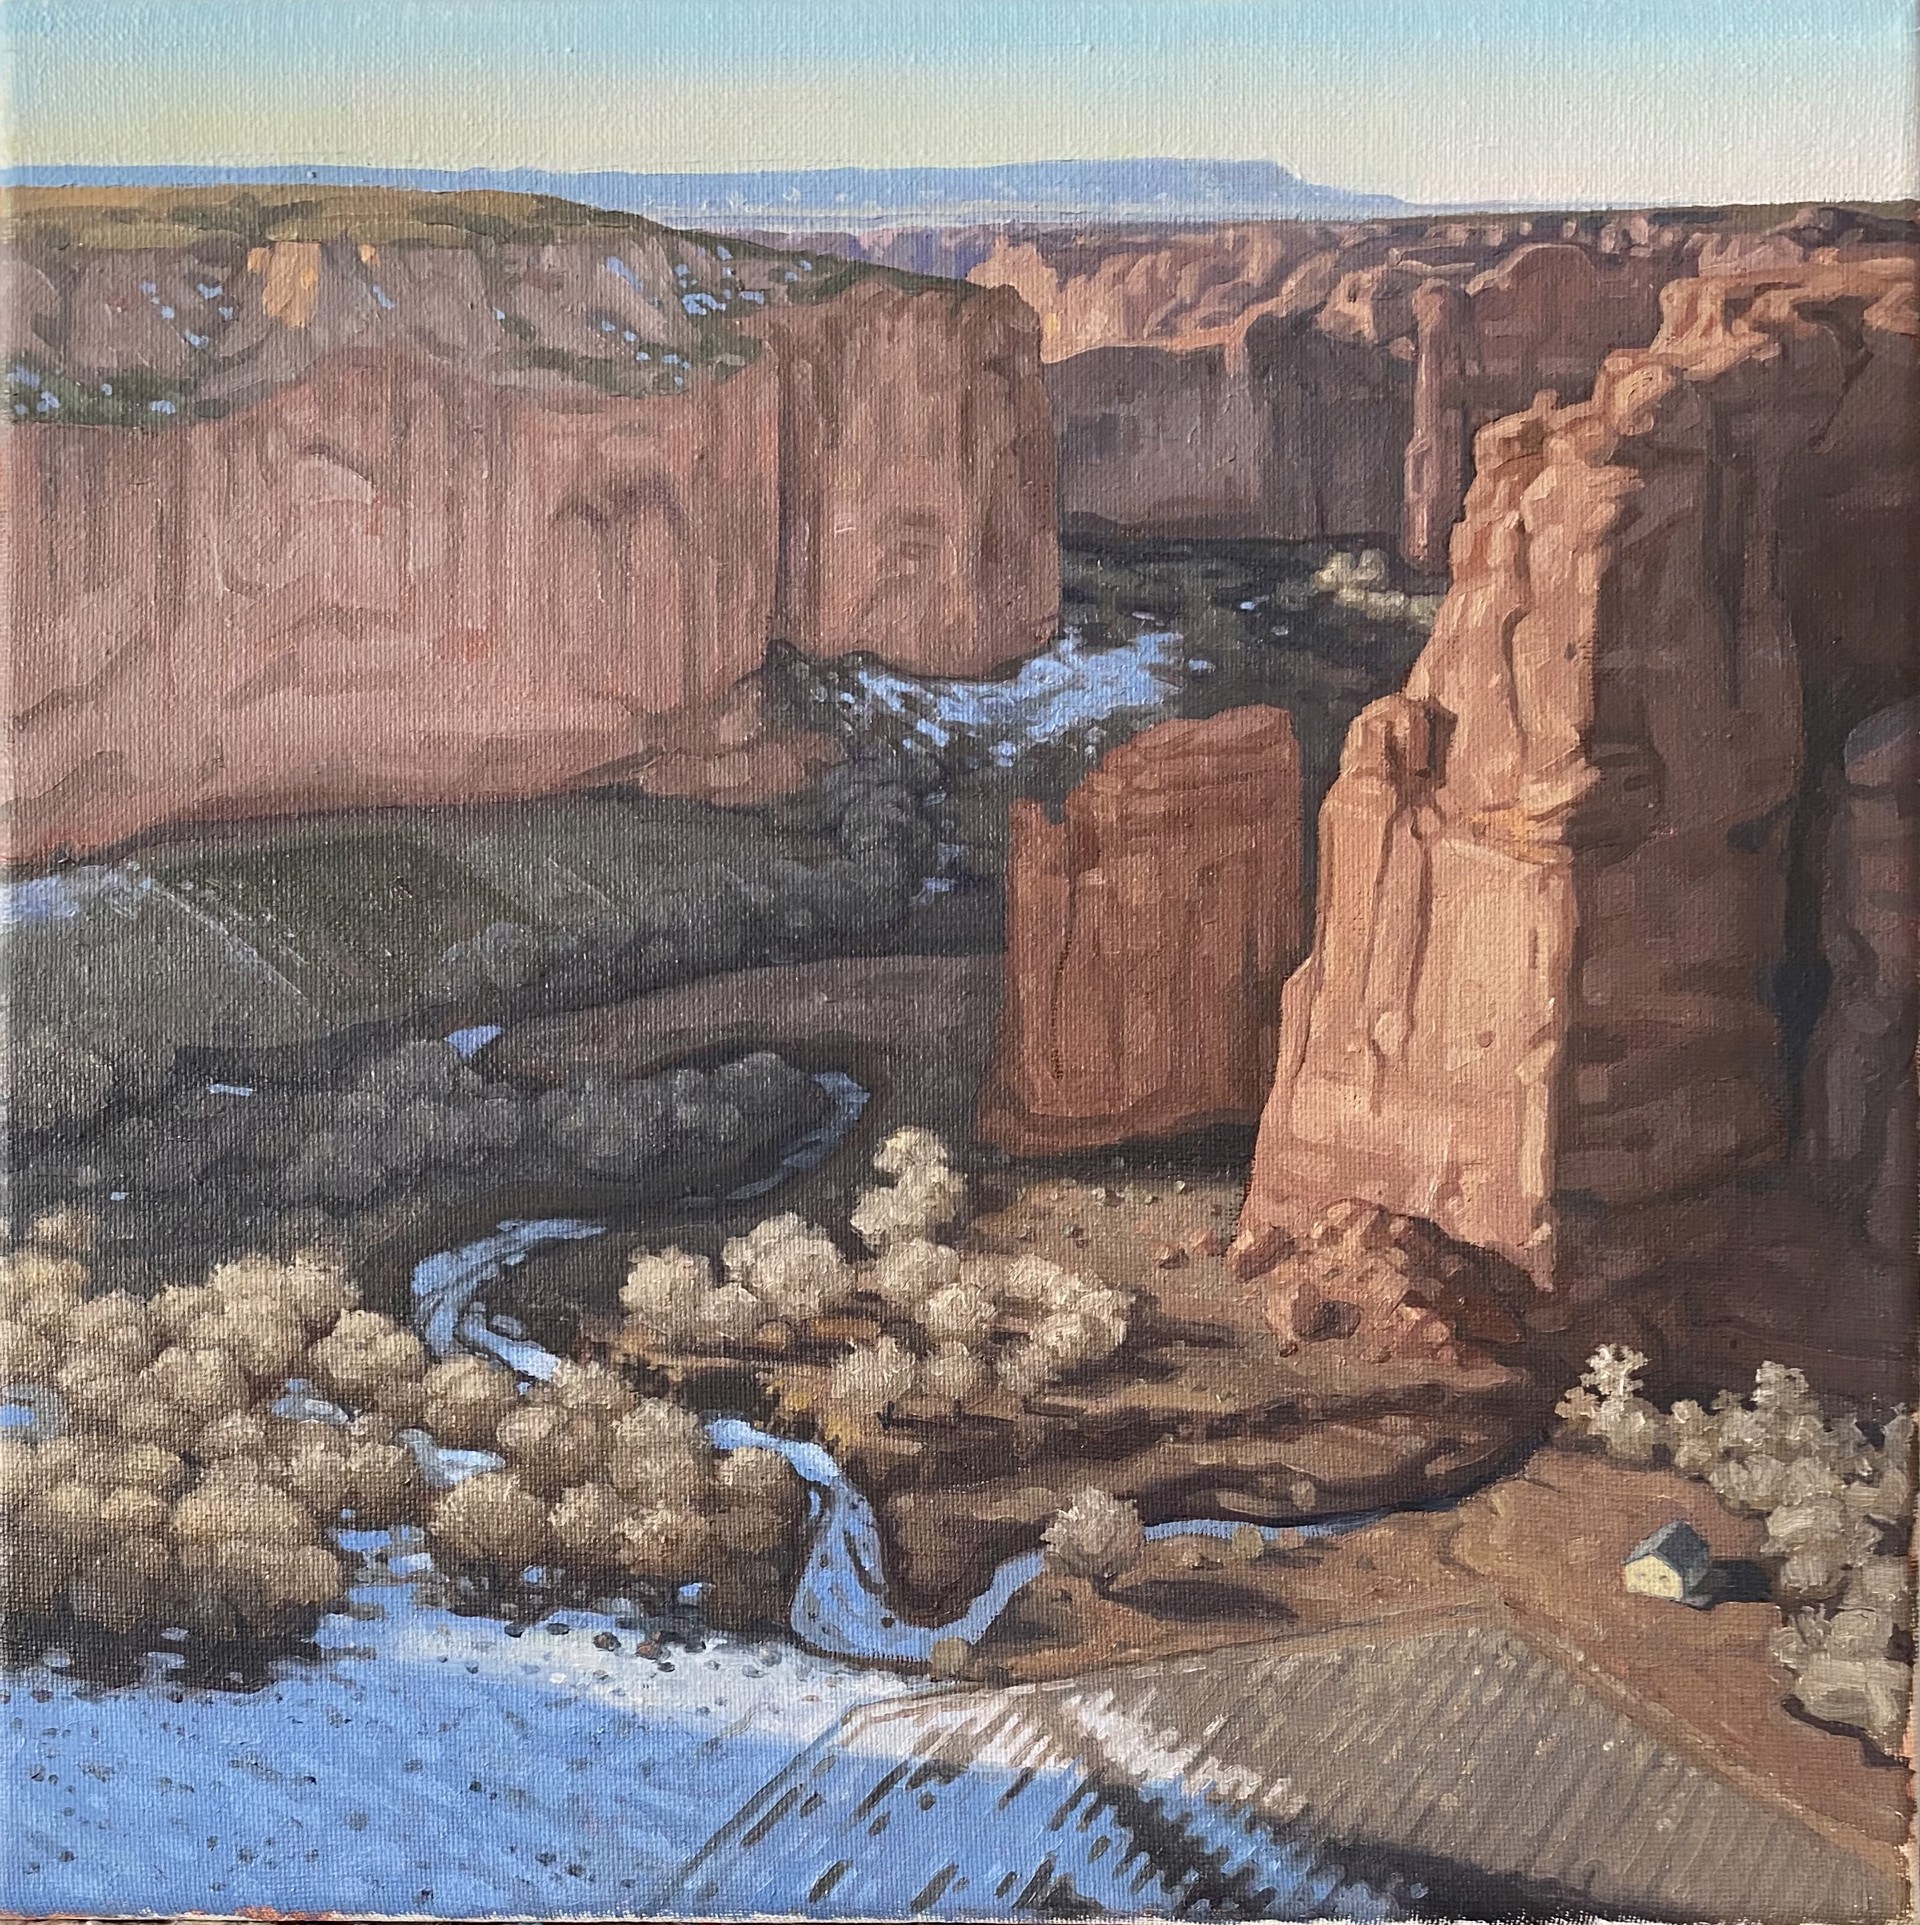 Farm in Winter at Canyon de Chelly by Colin Chillag